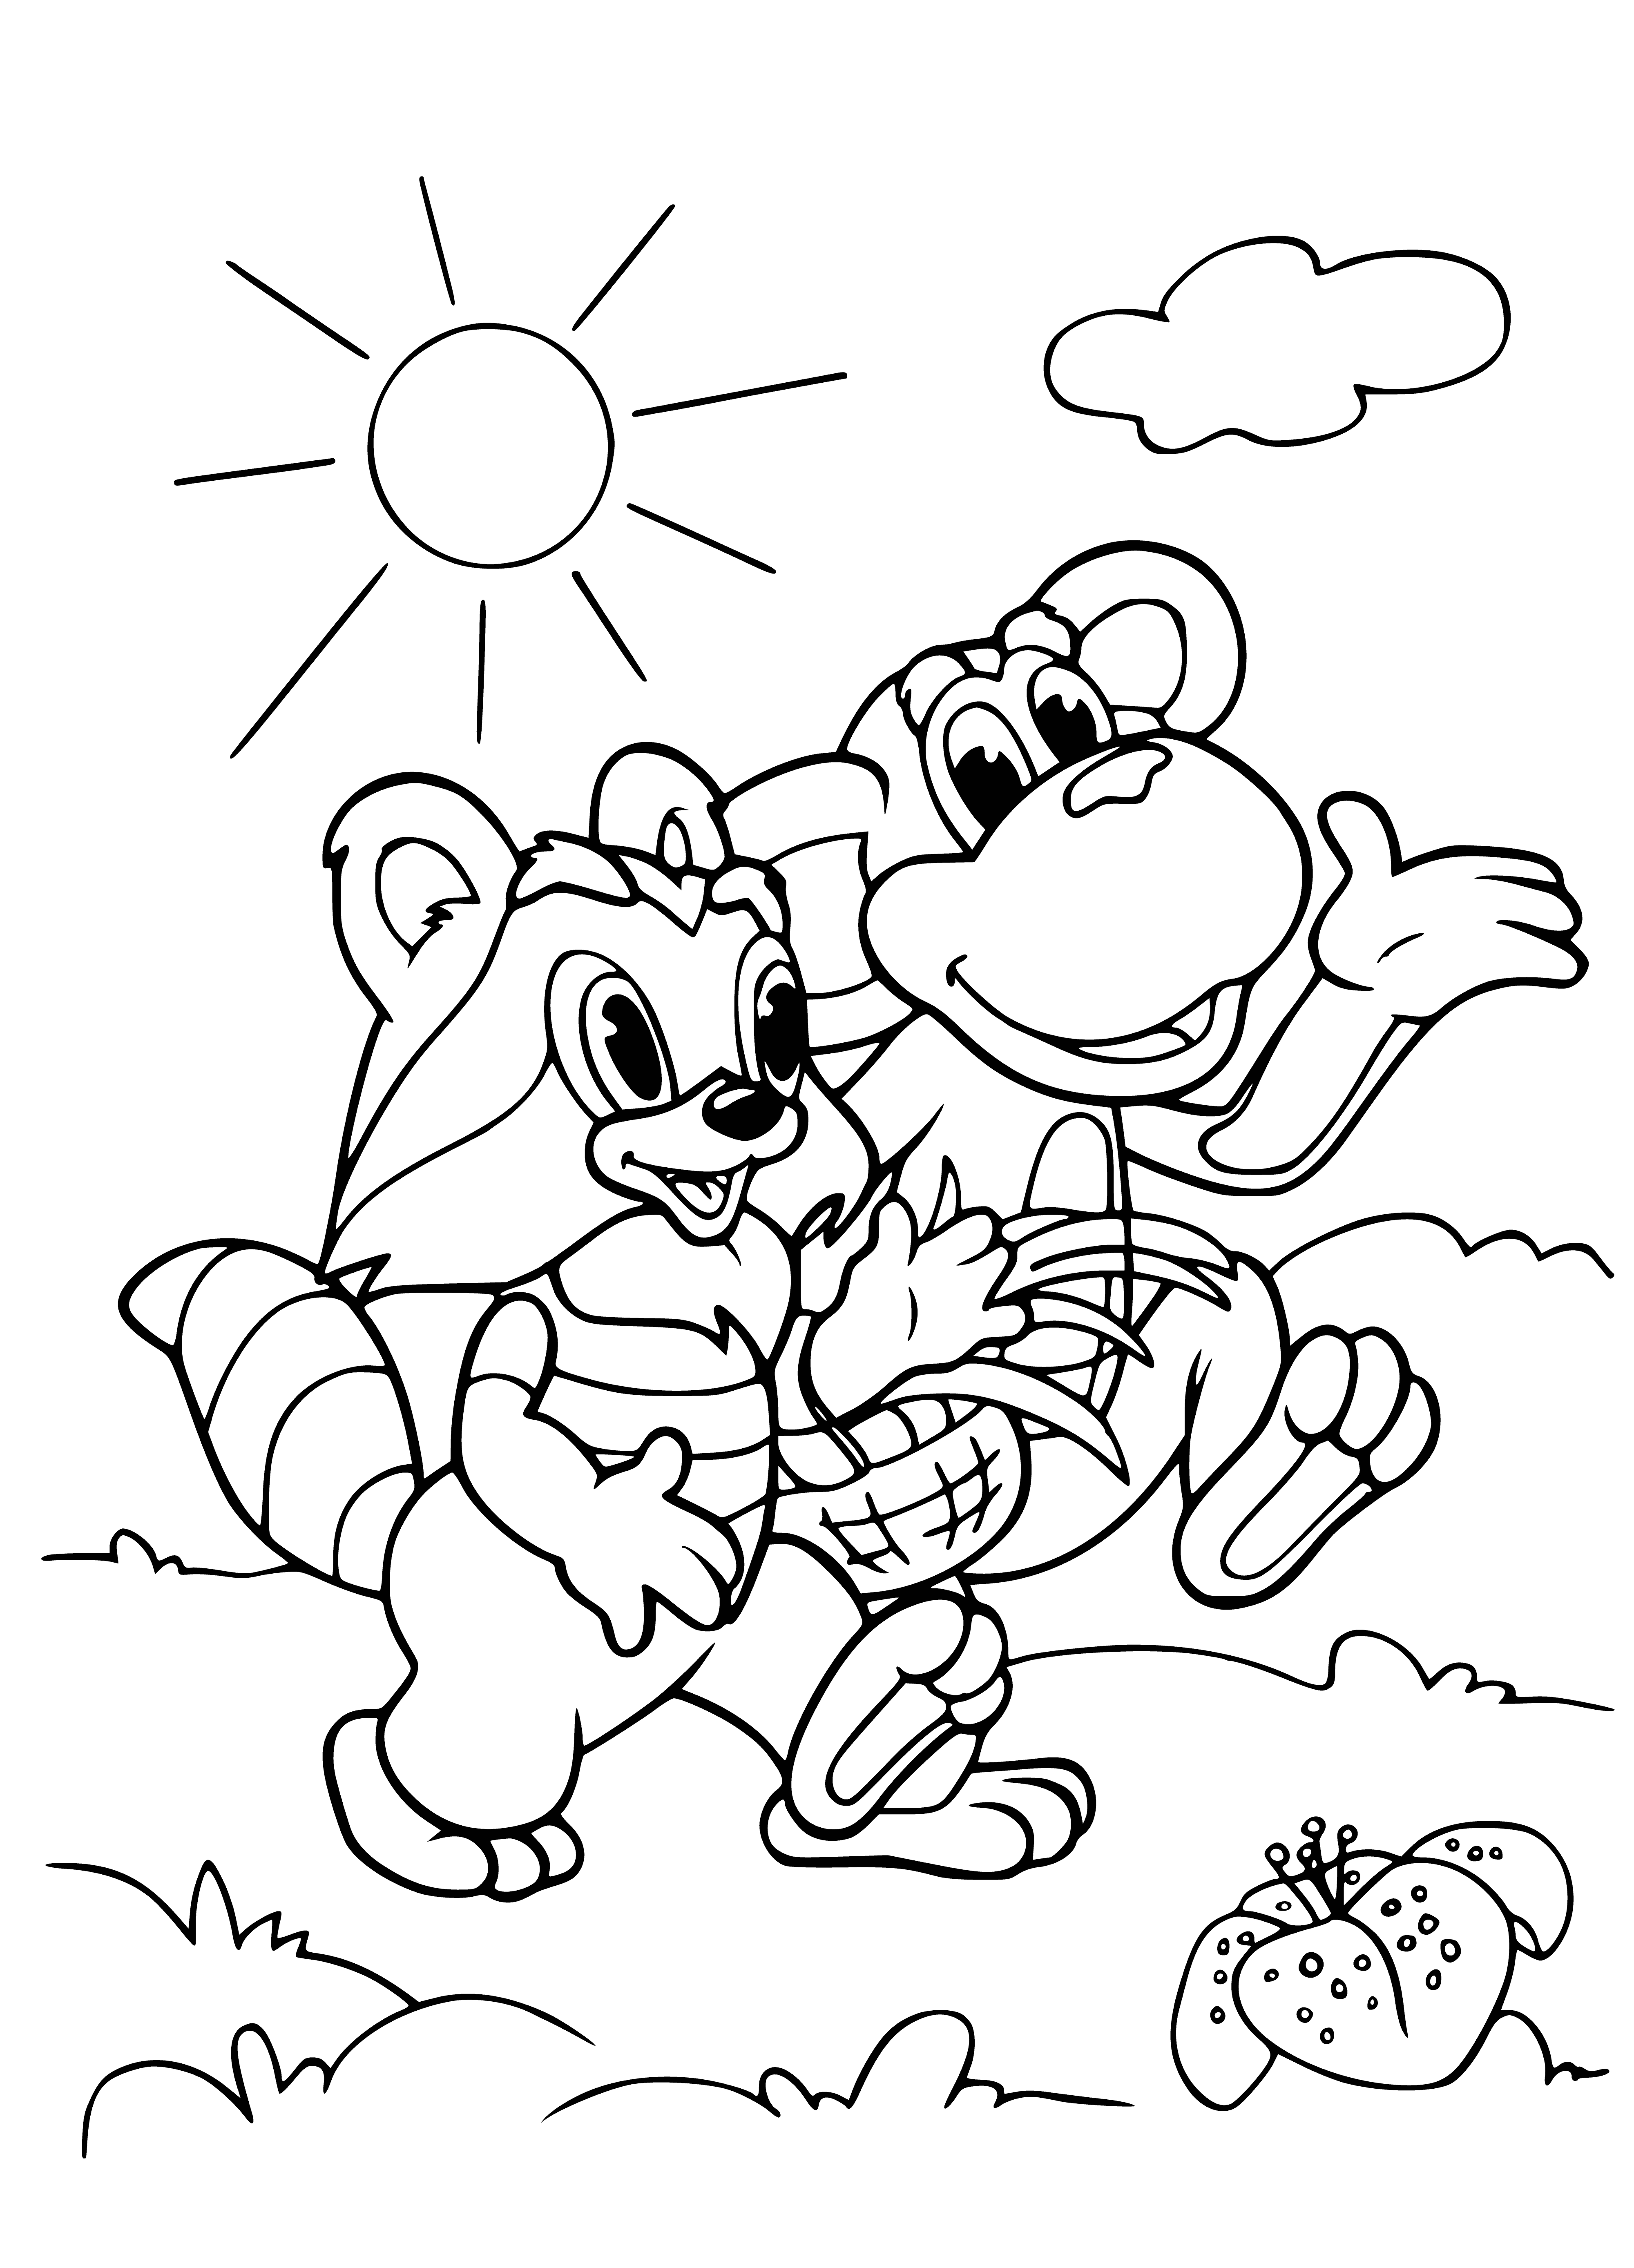 coloring page: Raccoon stands on banana peel held by grinning monkey, ready to fall.